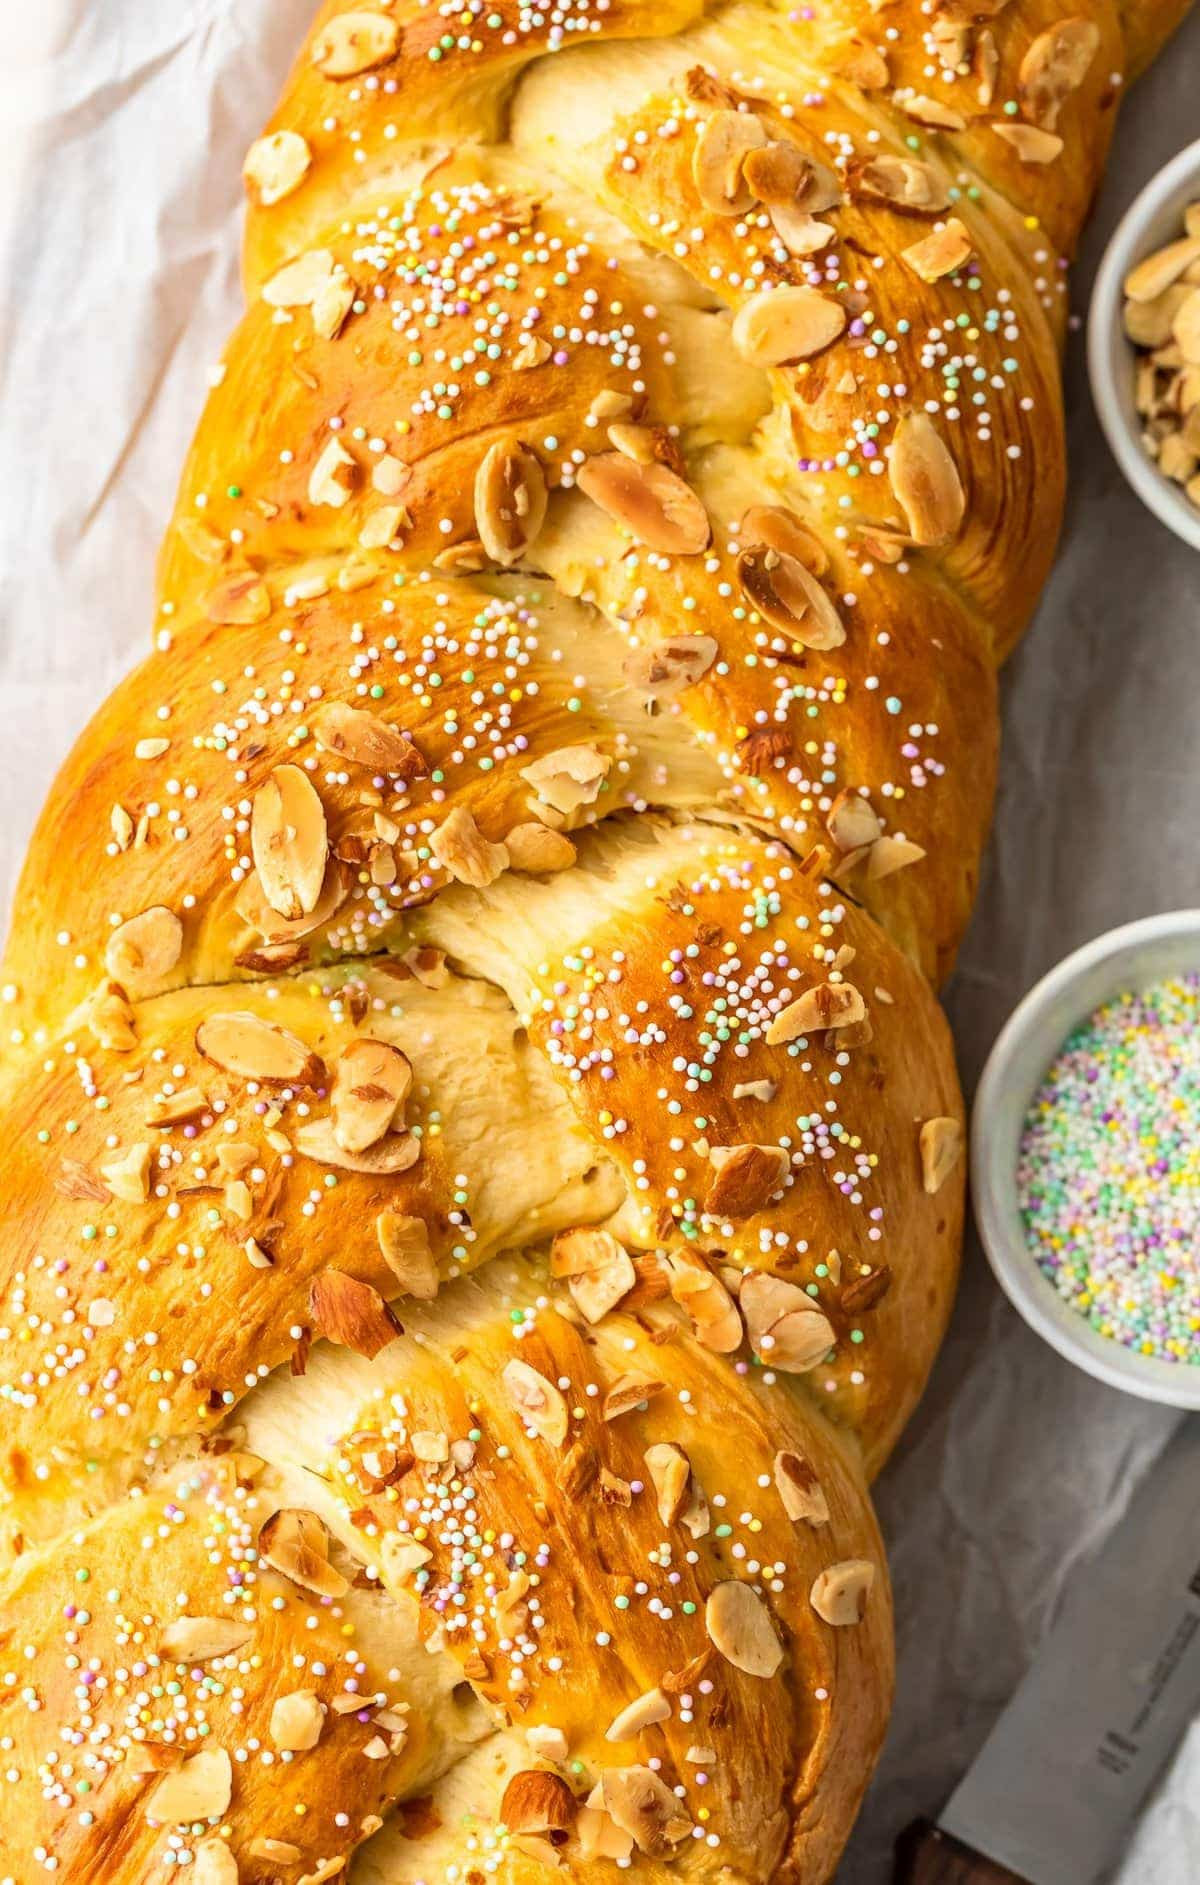 Easter Bread Recipes Awesome Easter Bread Recipe orange Almond Sweet Bread Video